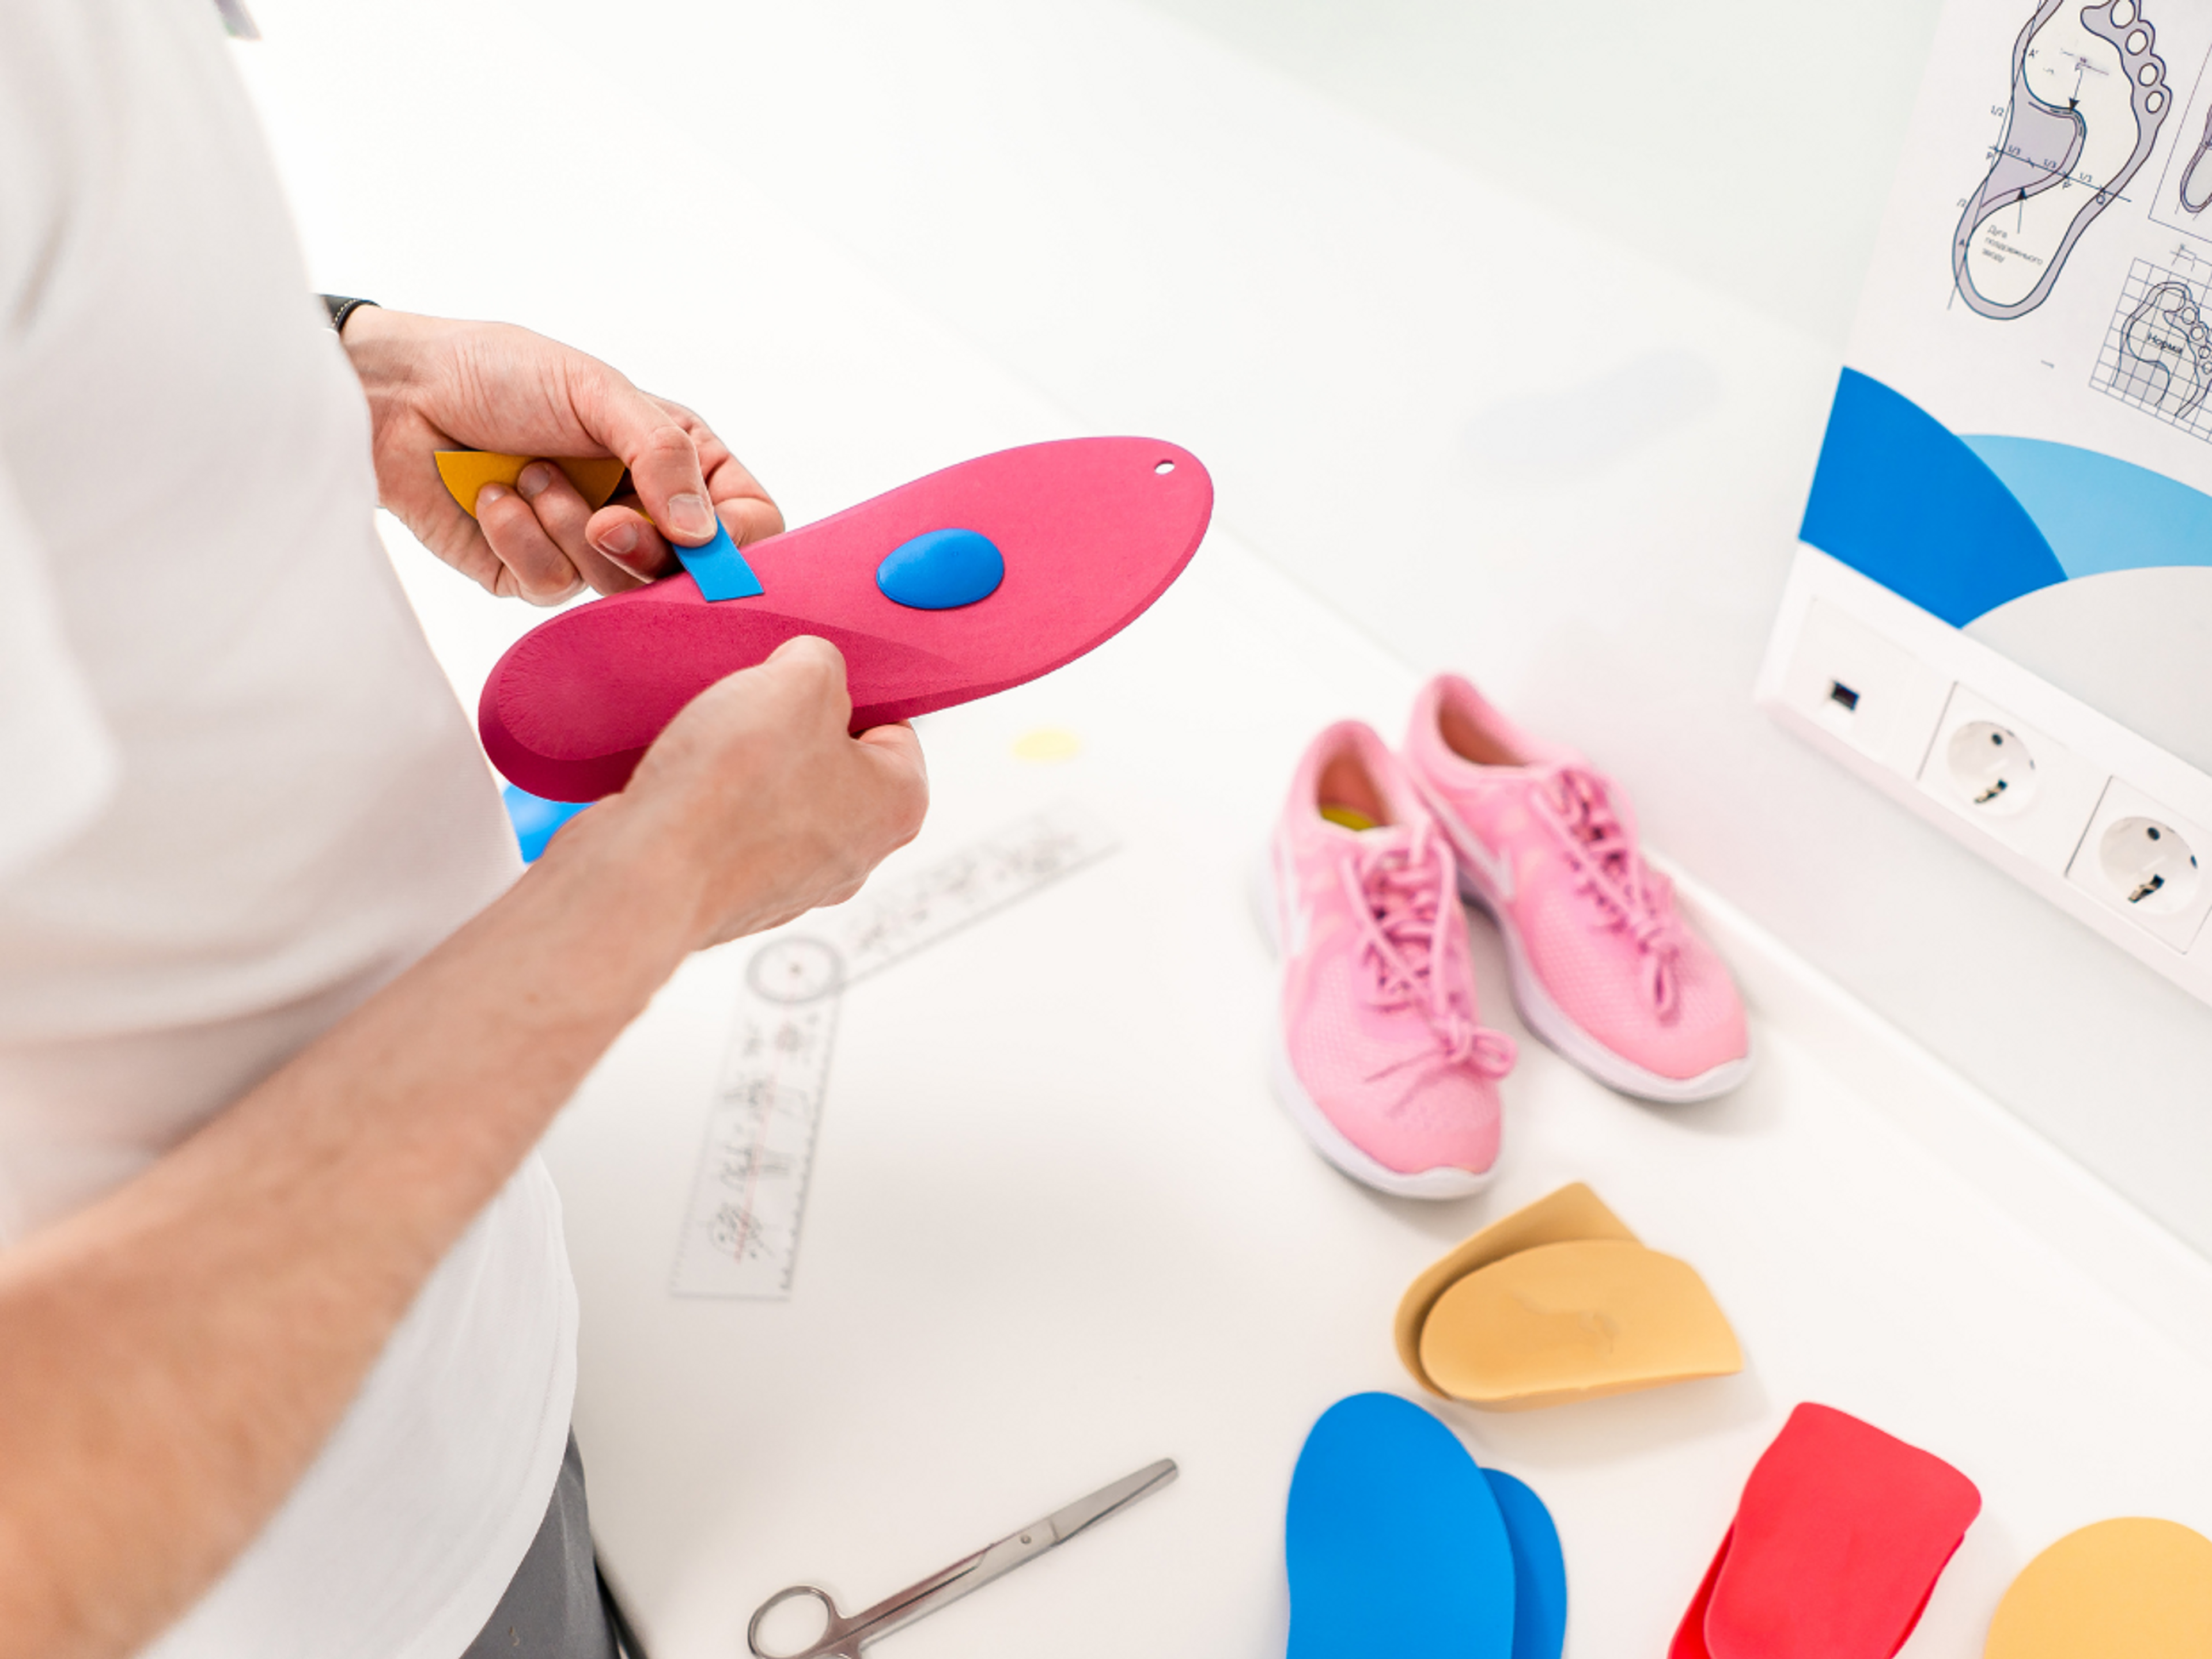 Custom orthotic insoles are made to fit the exact features of your feet and may be useful for treating plantar fasciitis.